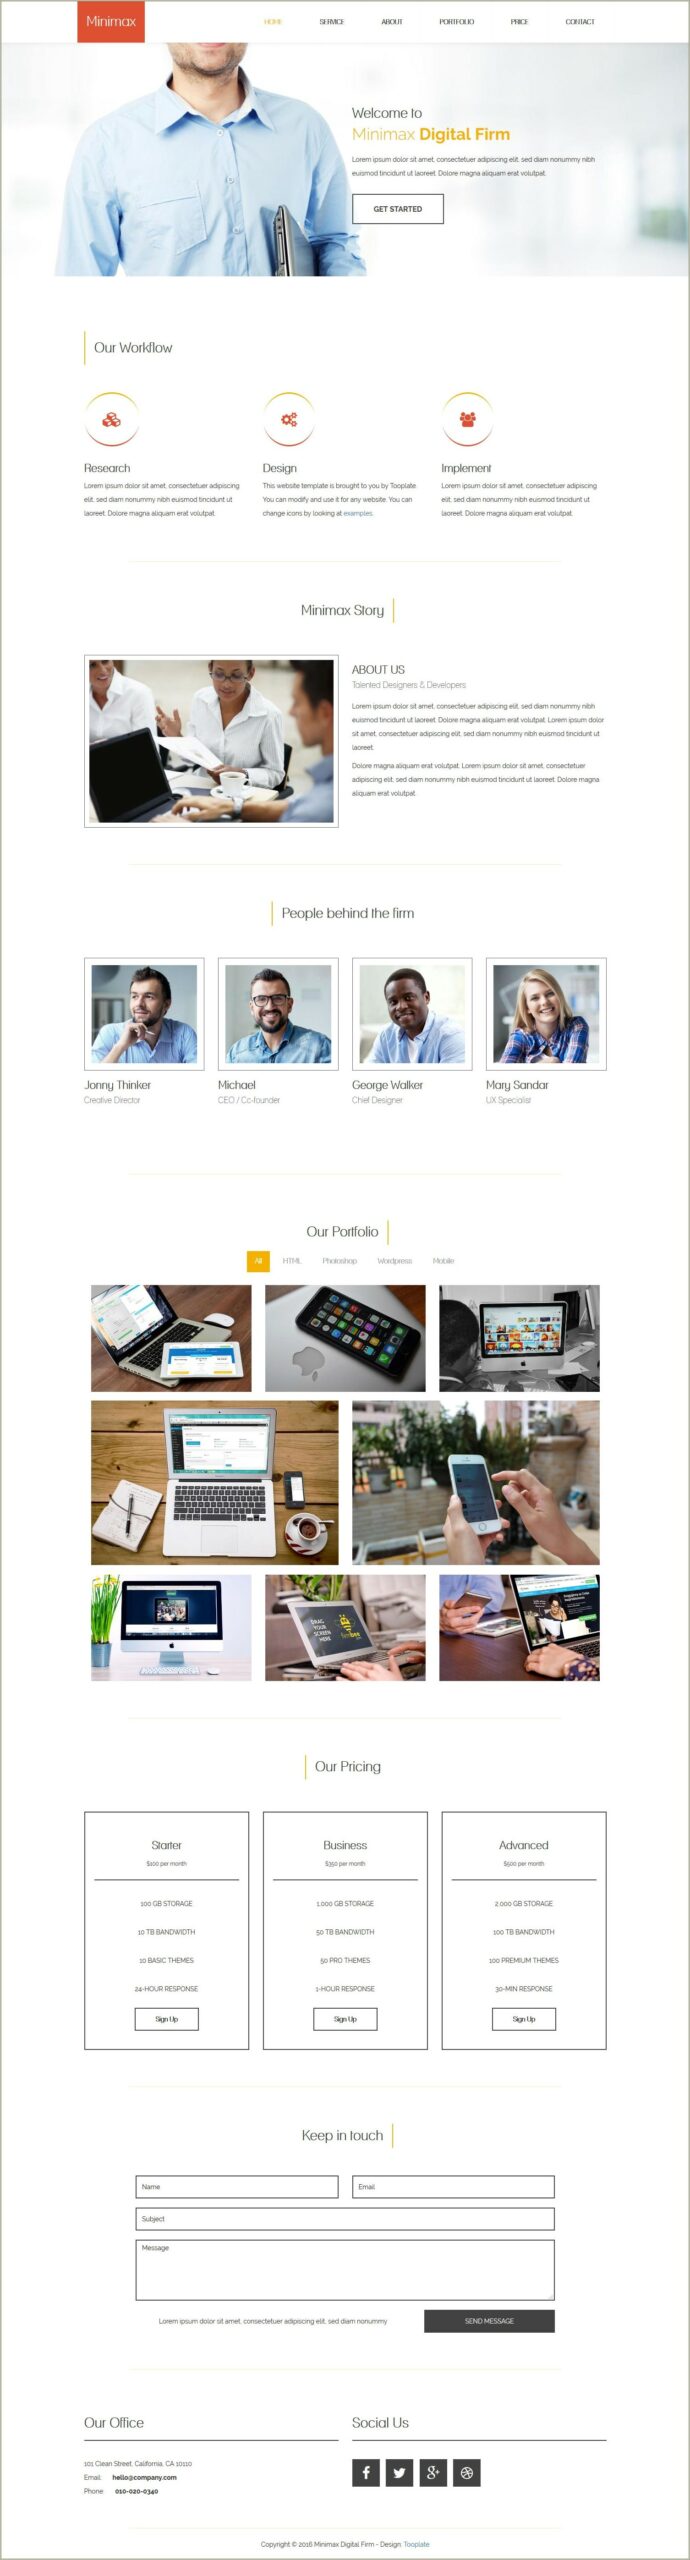 Employee Management System Css Templates Free Download